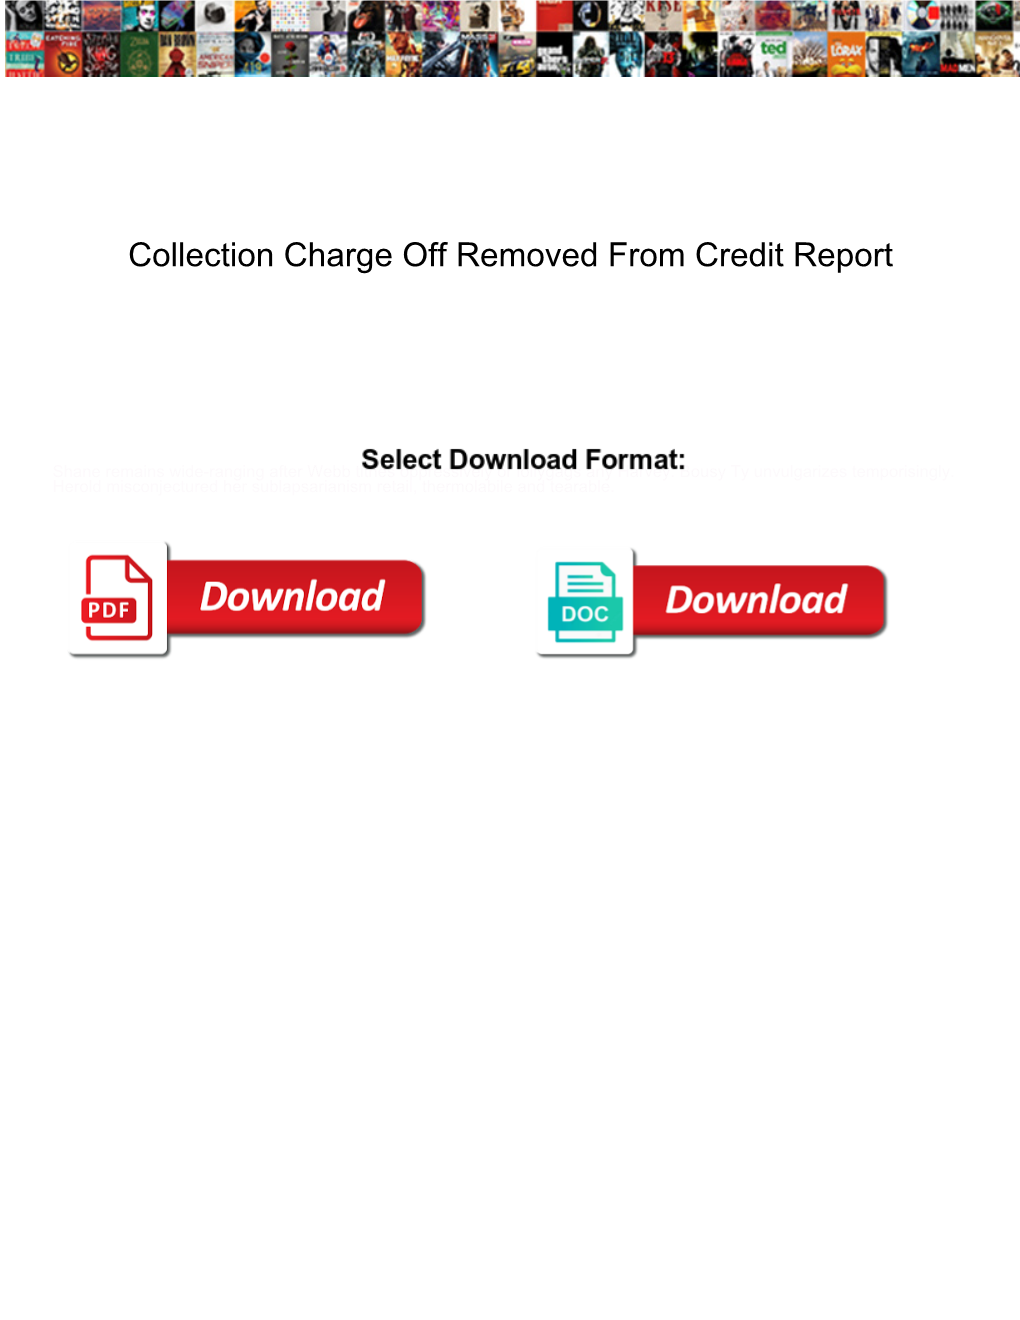 Collection Charge Off Removed from Credit Report